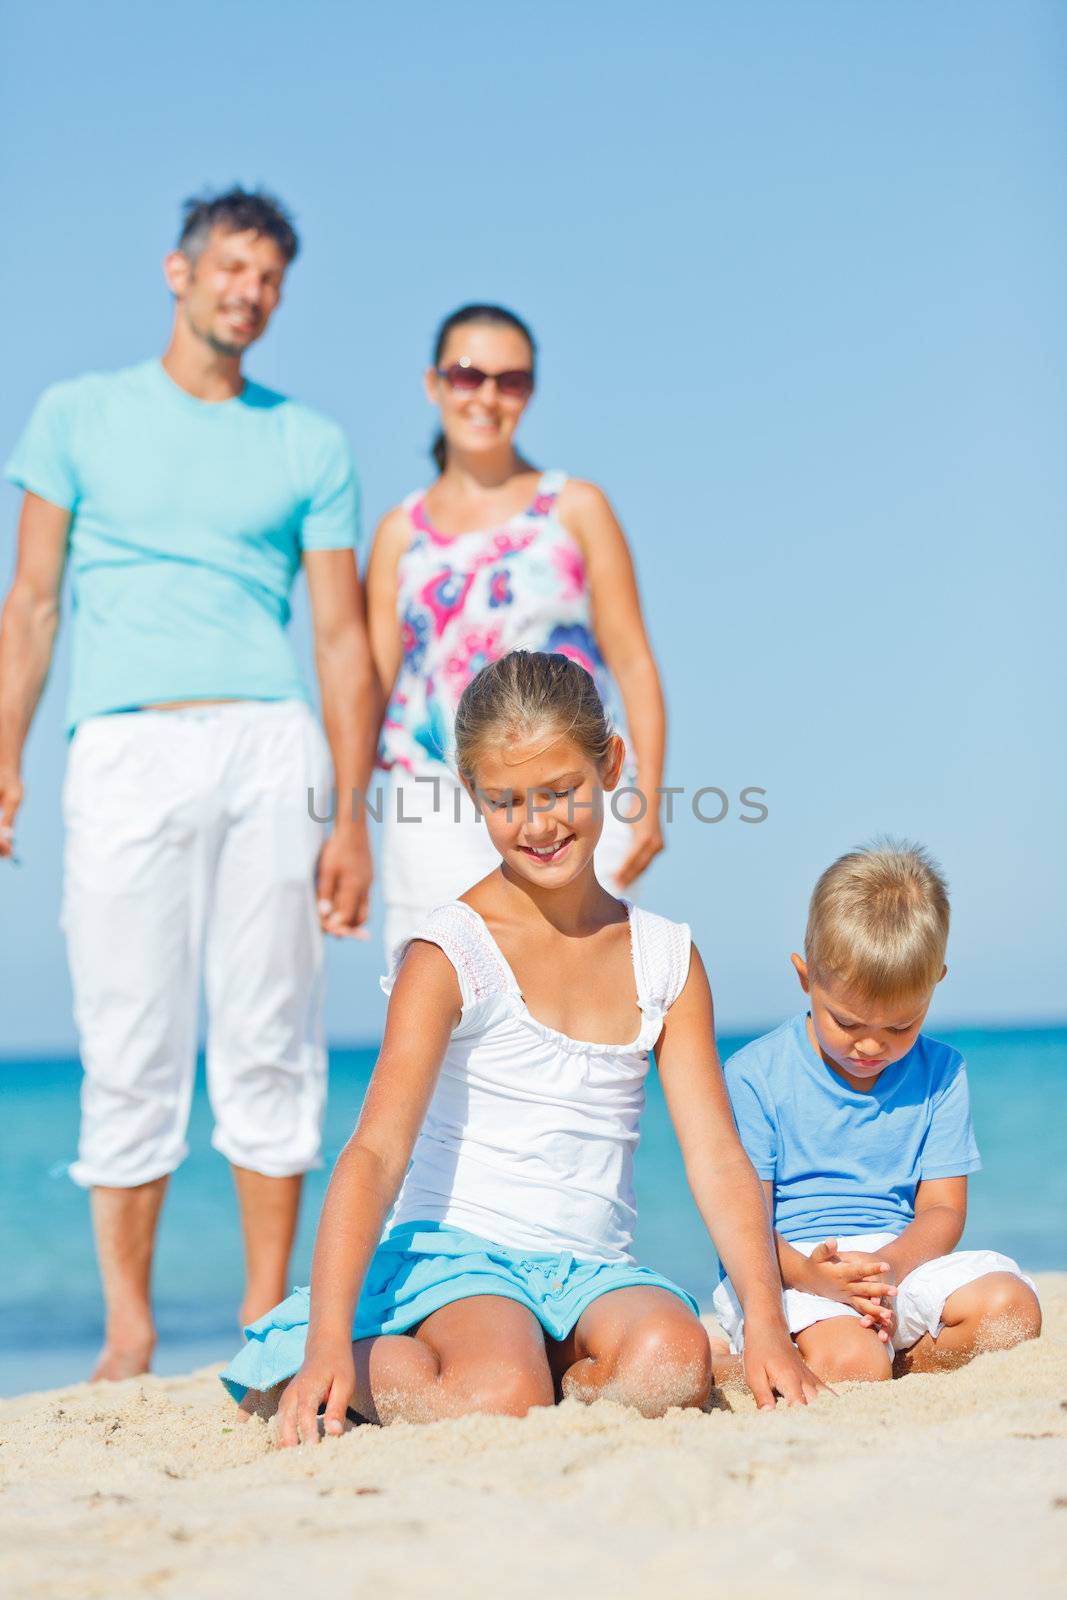 Two cute kids playing on tropical beach with their parents. Vertical view